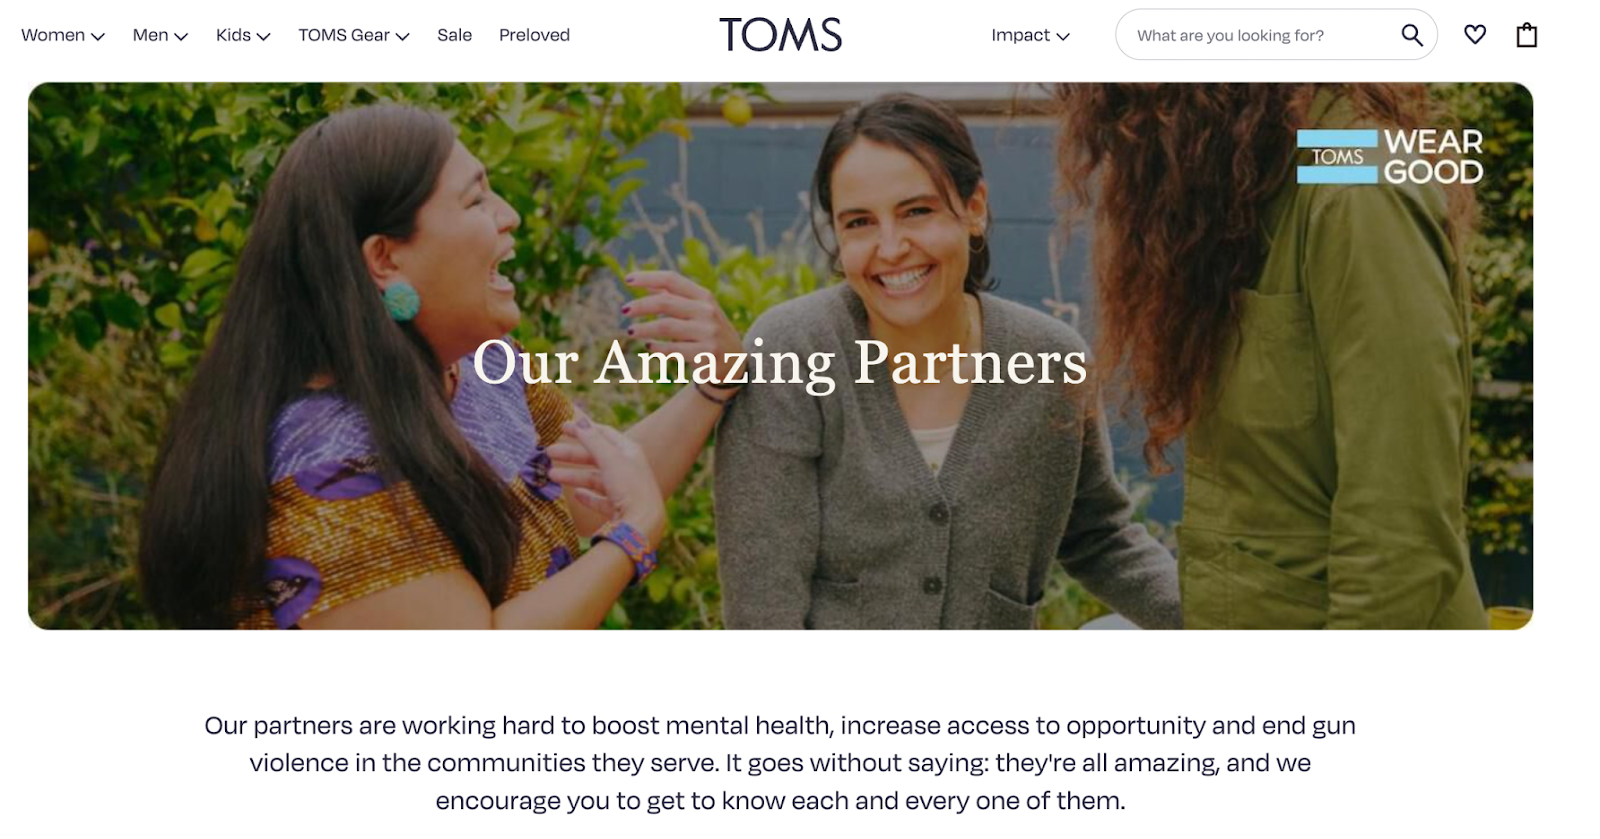 TOMS initiatives - loyalty examples